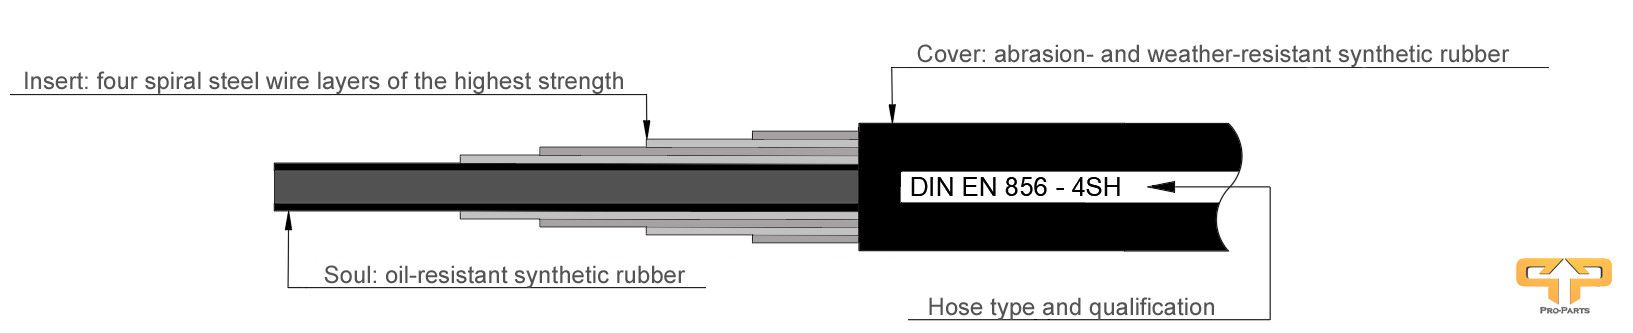 Representation and structure of a 4SH hydraulic hose